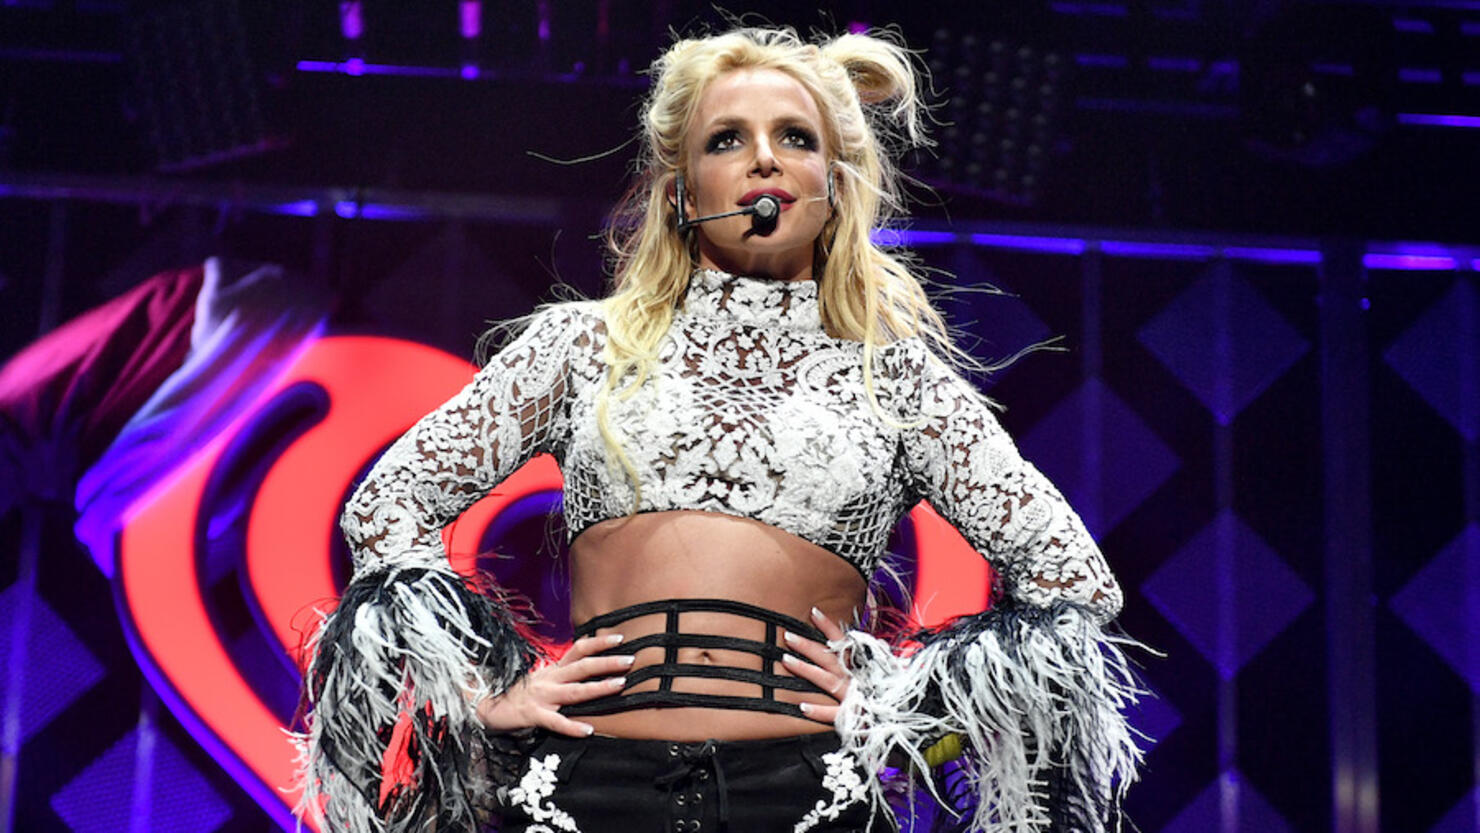 Britney Spears Shows Off Her Amazing Singing Voice In Throwback Video